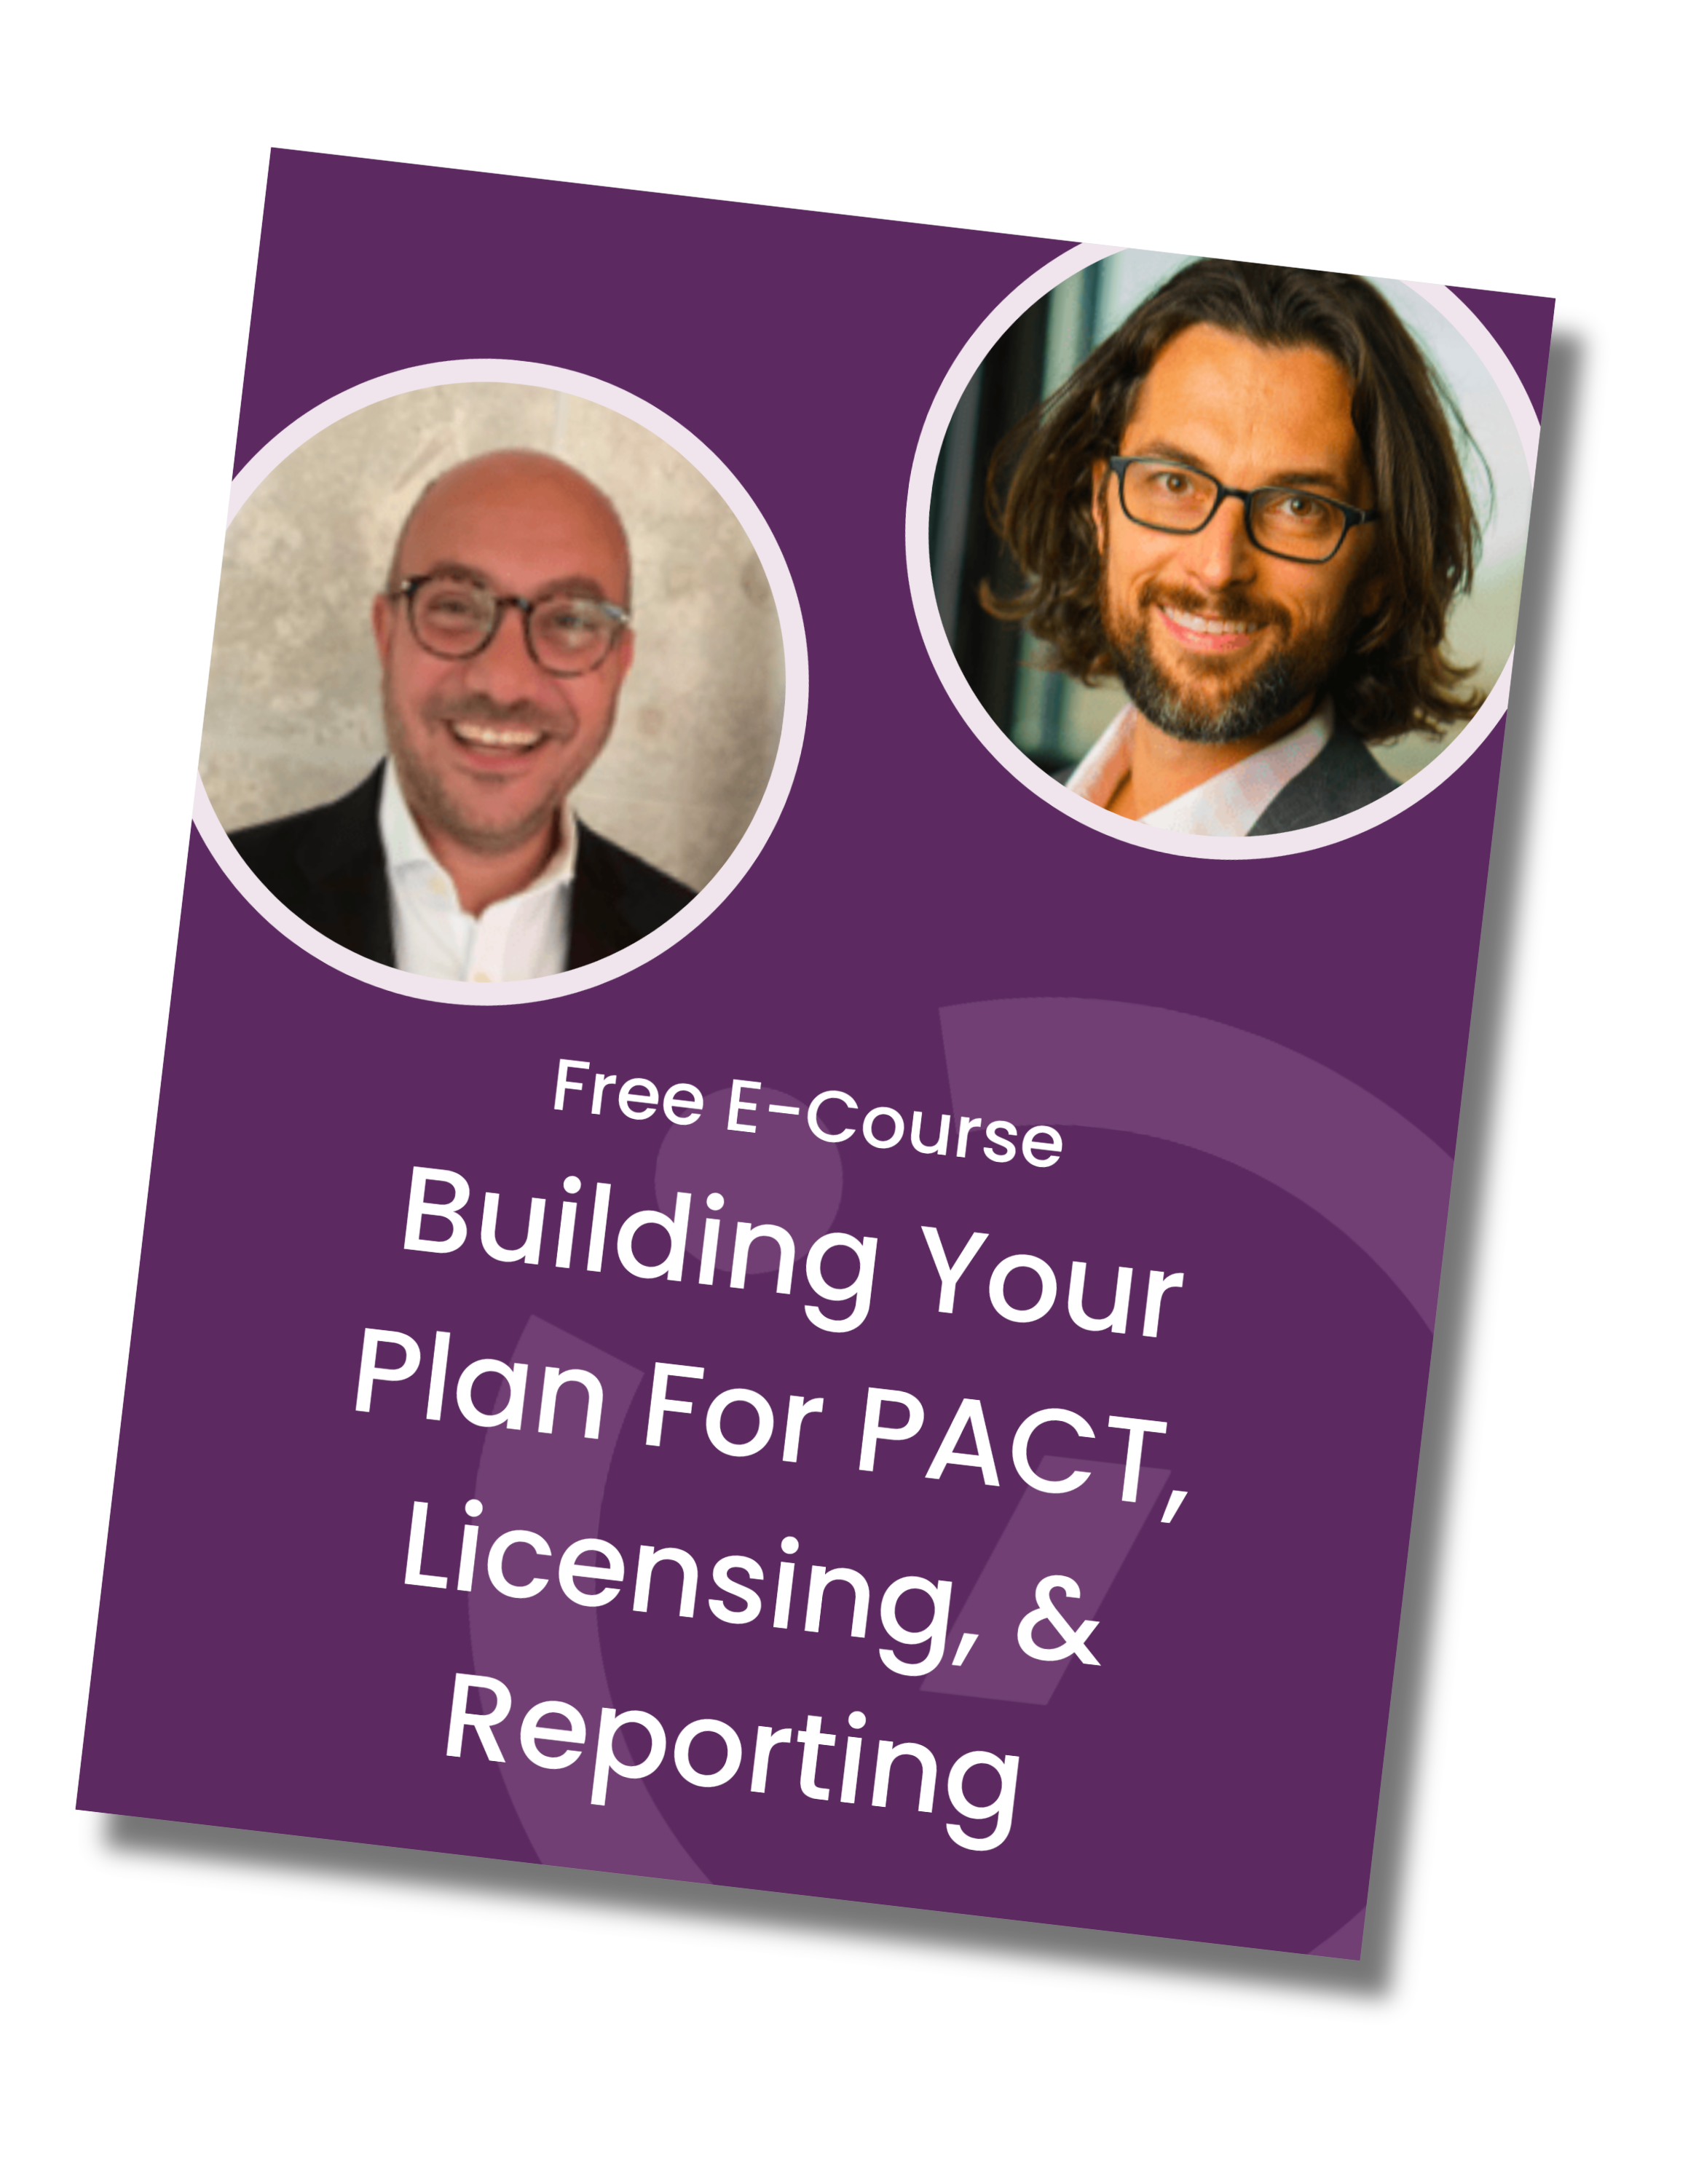 Building Your Plan For PACT, Licensing, & Reporting (2)